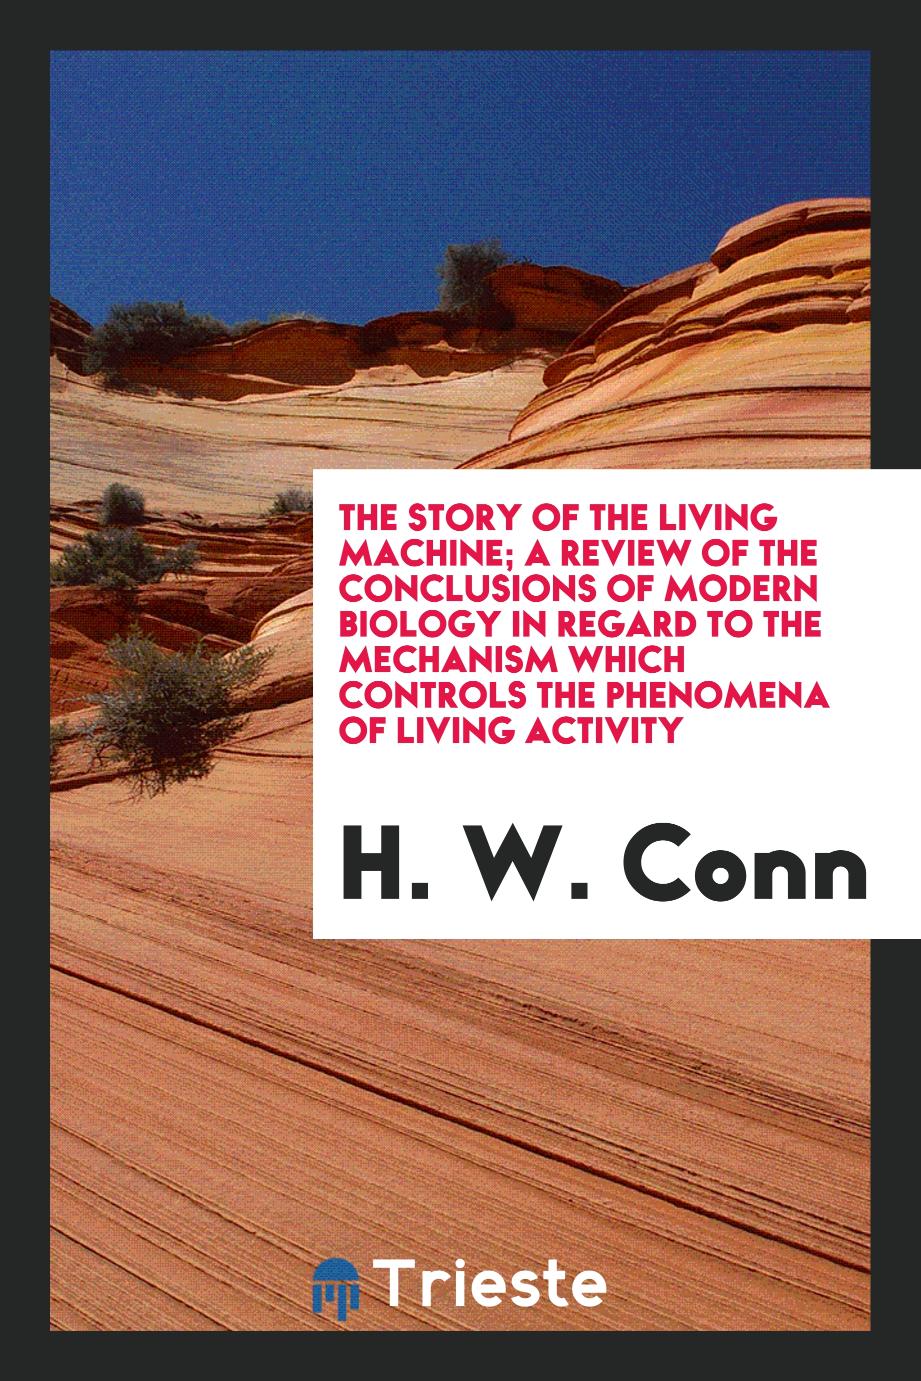 The story of the living machine; a review of the conclusions of modern biology in regard to the mechanism which controls the phenomena of living activity